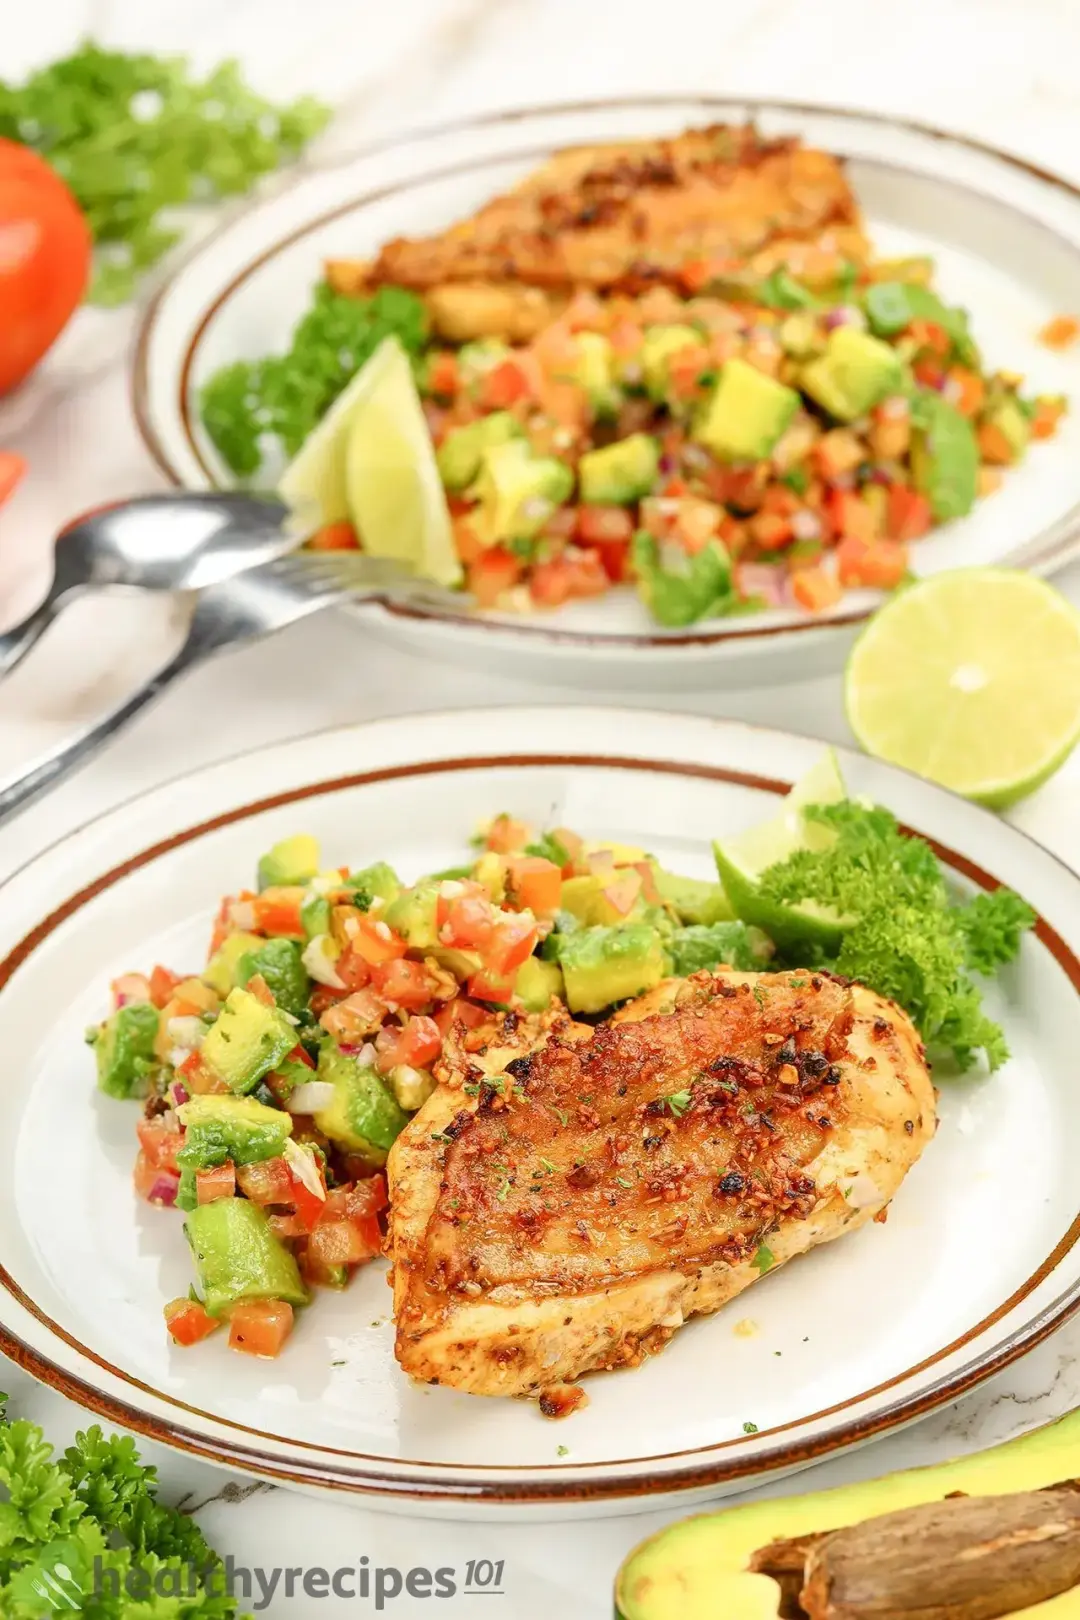 How to Store and Reheat chicken with avocado salsa